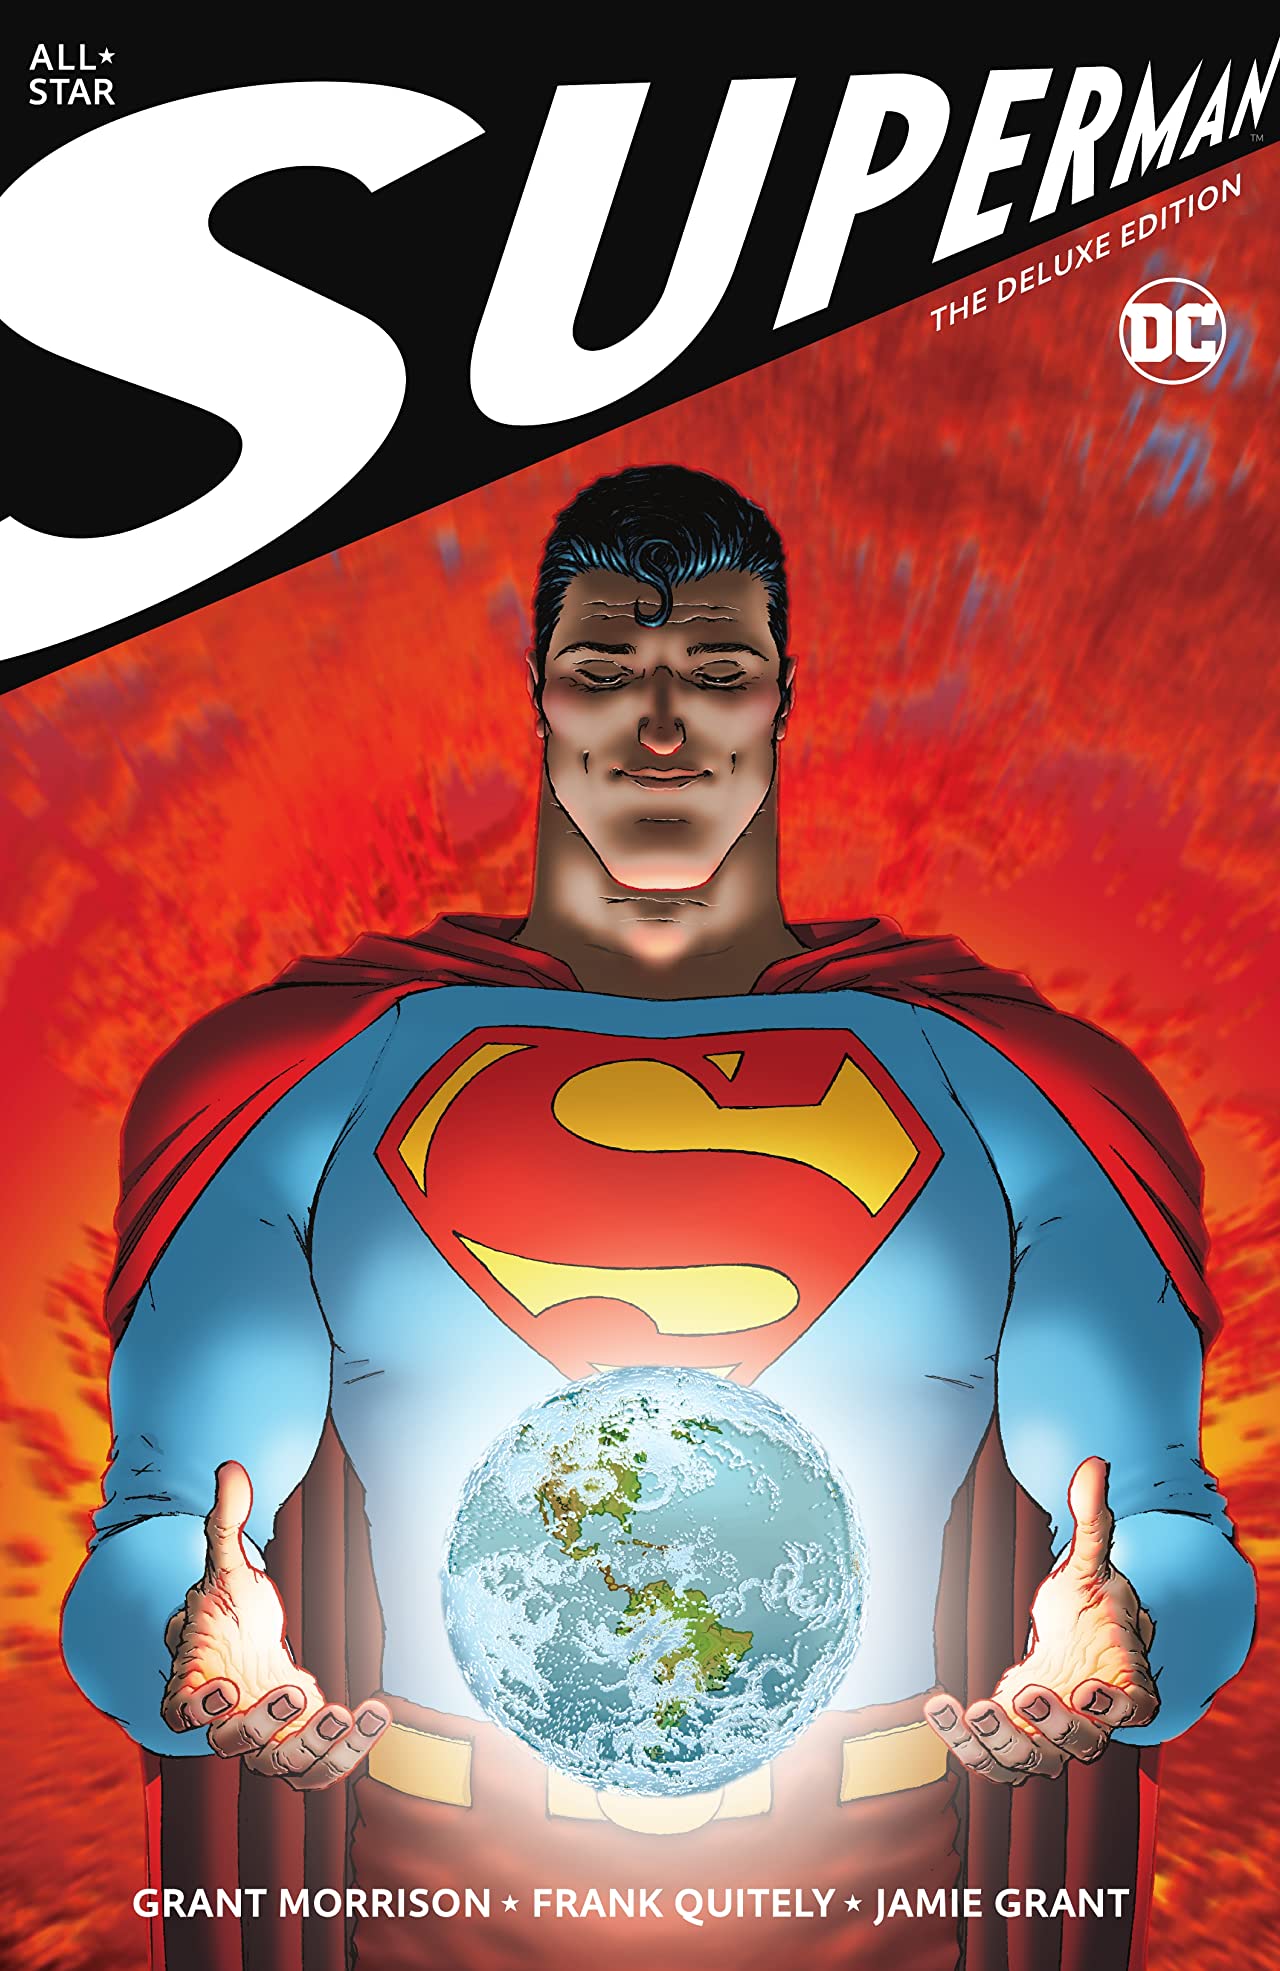 All Star Superman - The Deluxe Edition HC